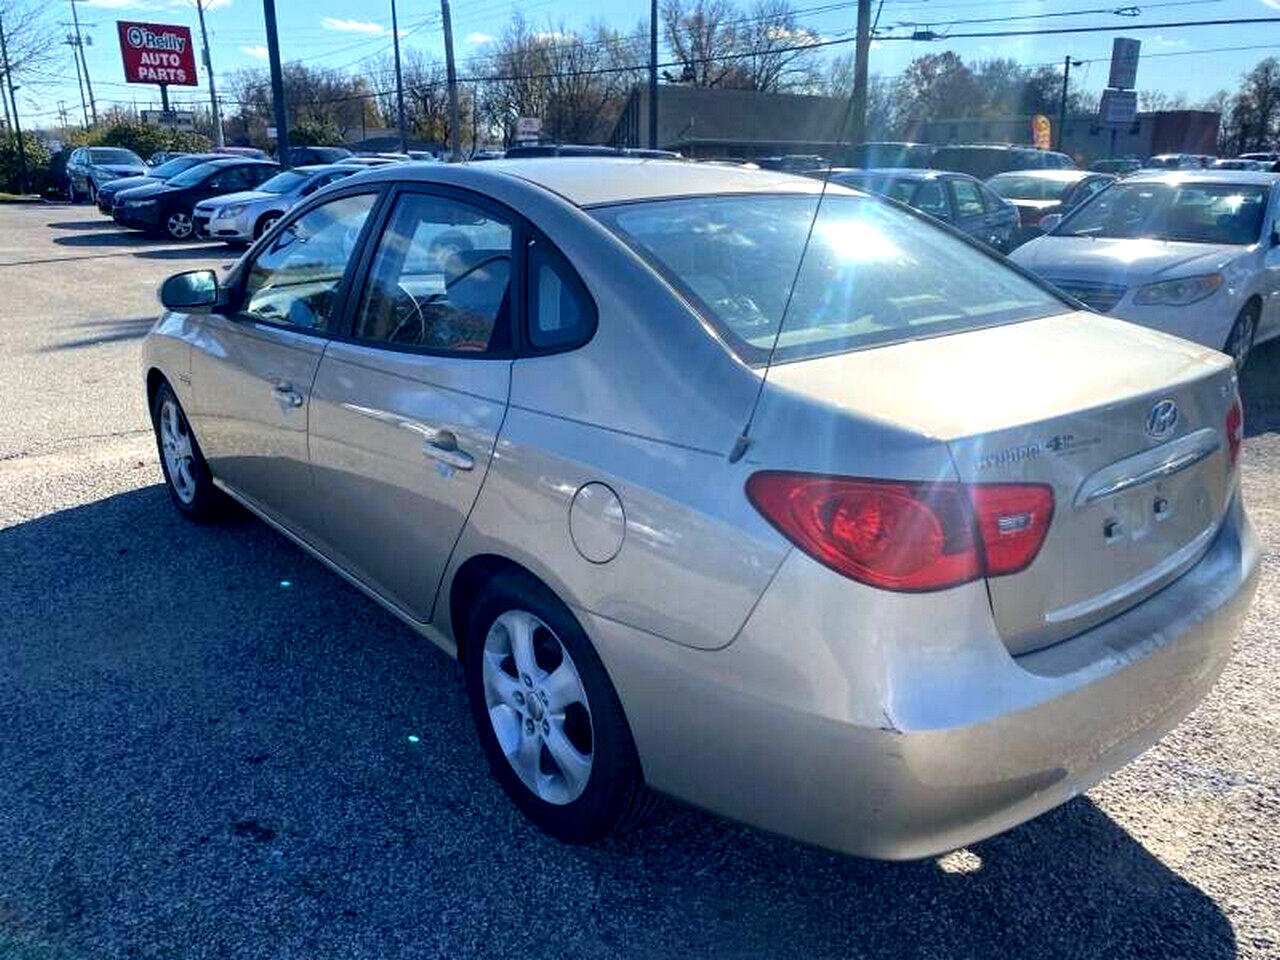 Used 2007 Hyundai Elantra Limited with VIN KMHDU46DX7U024070 for sale in Louisville, KY